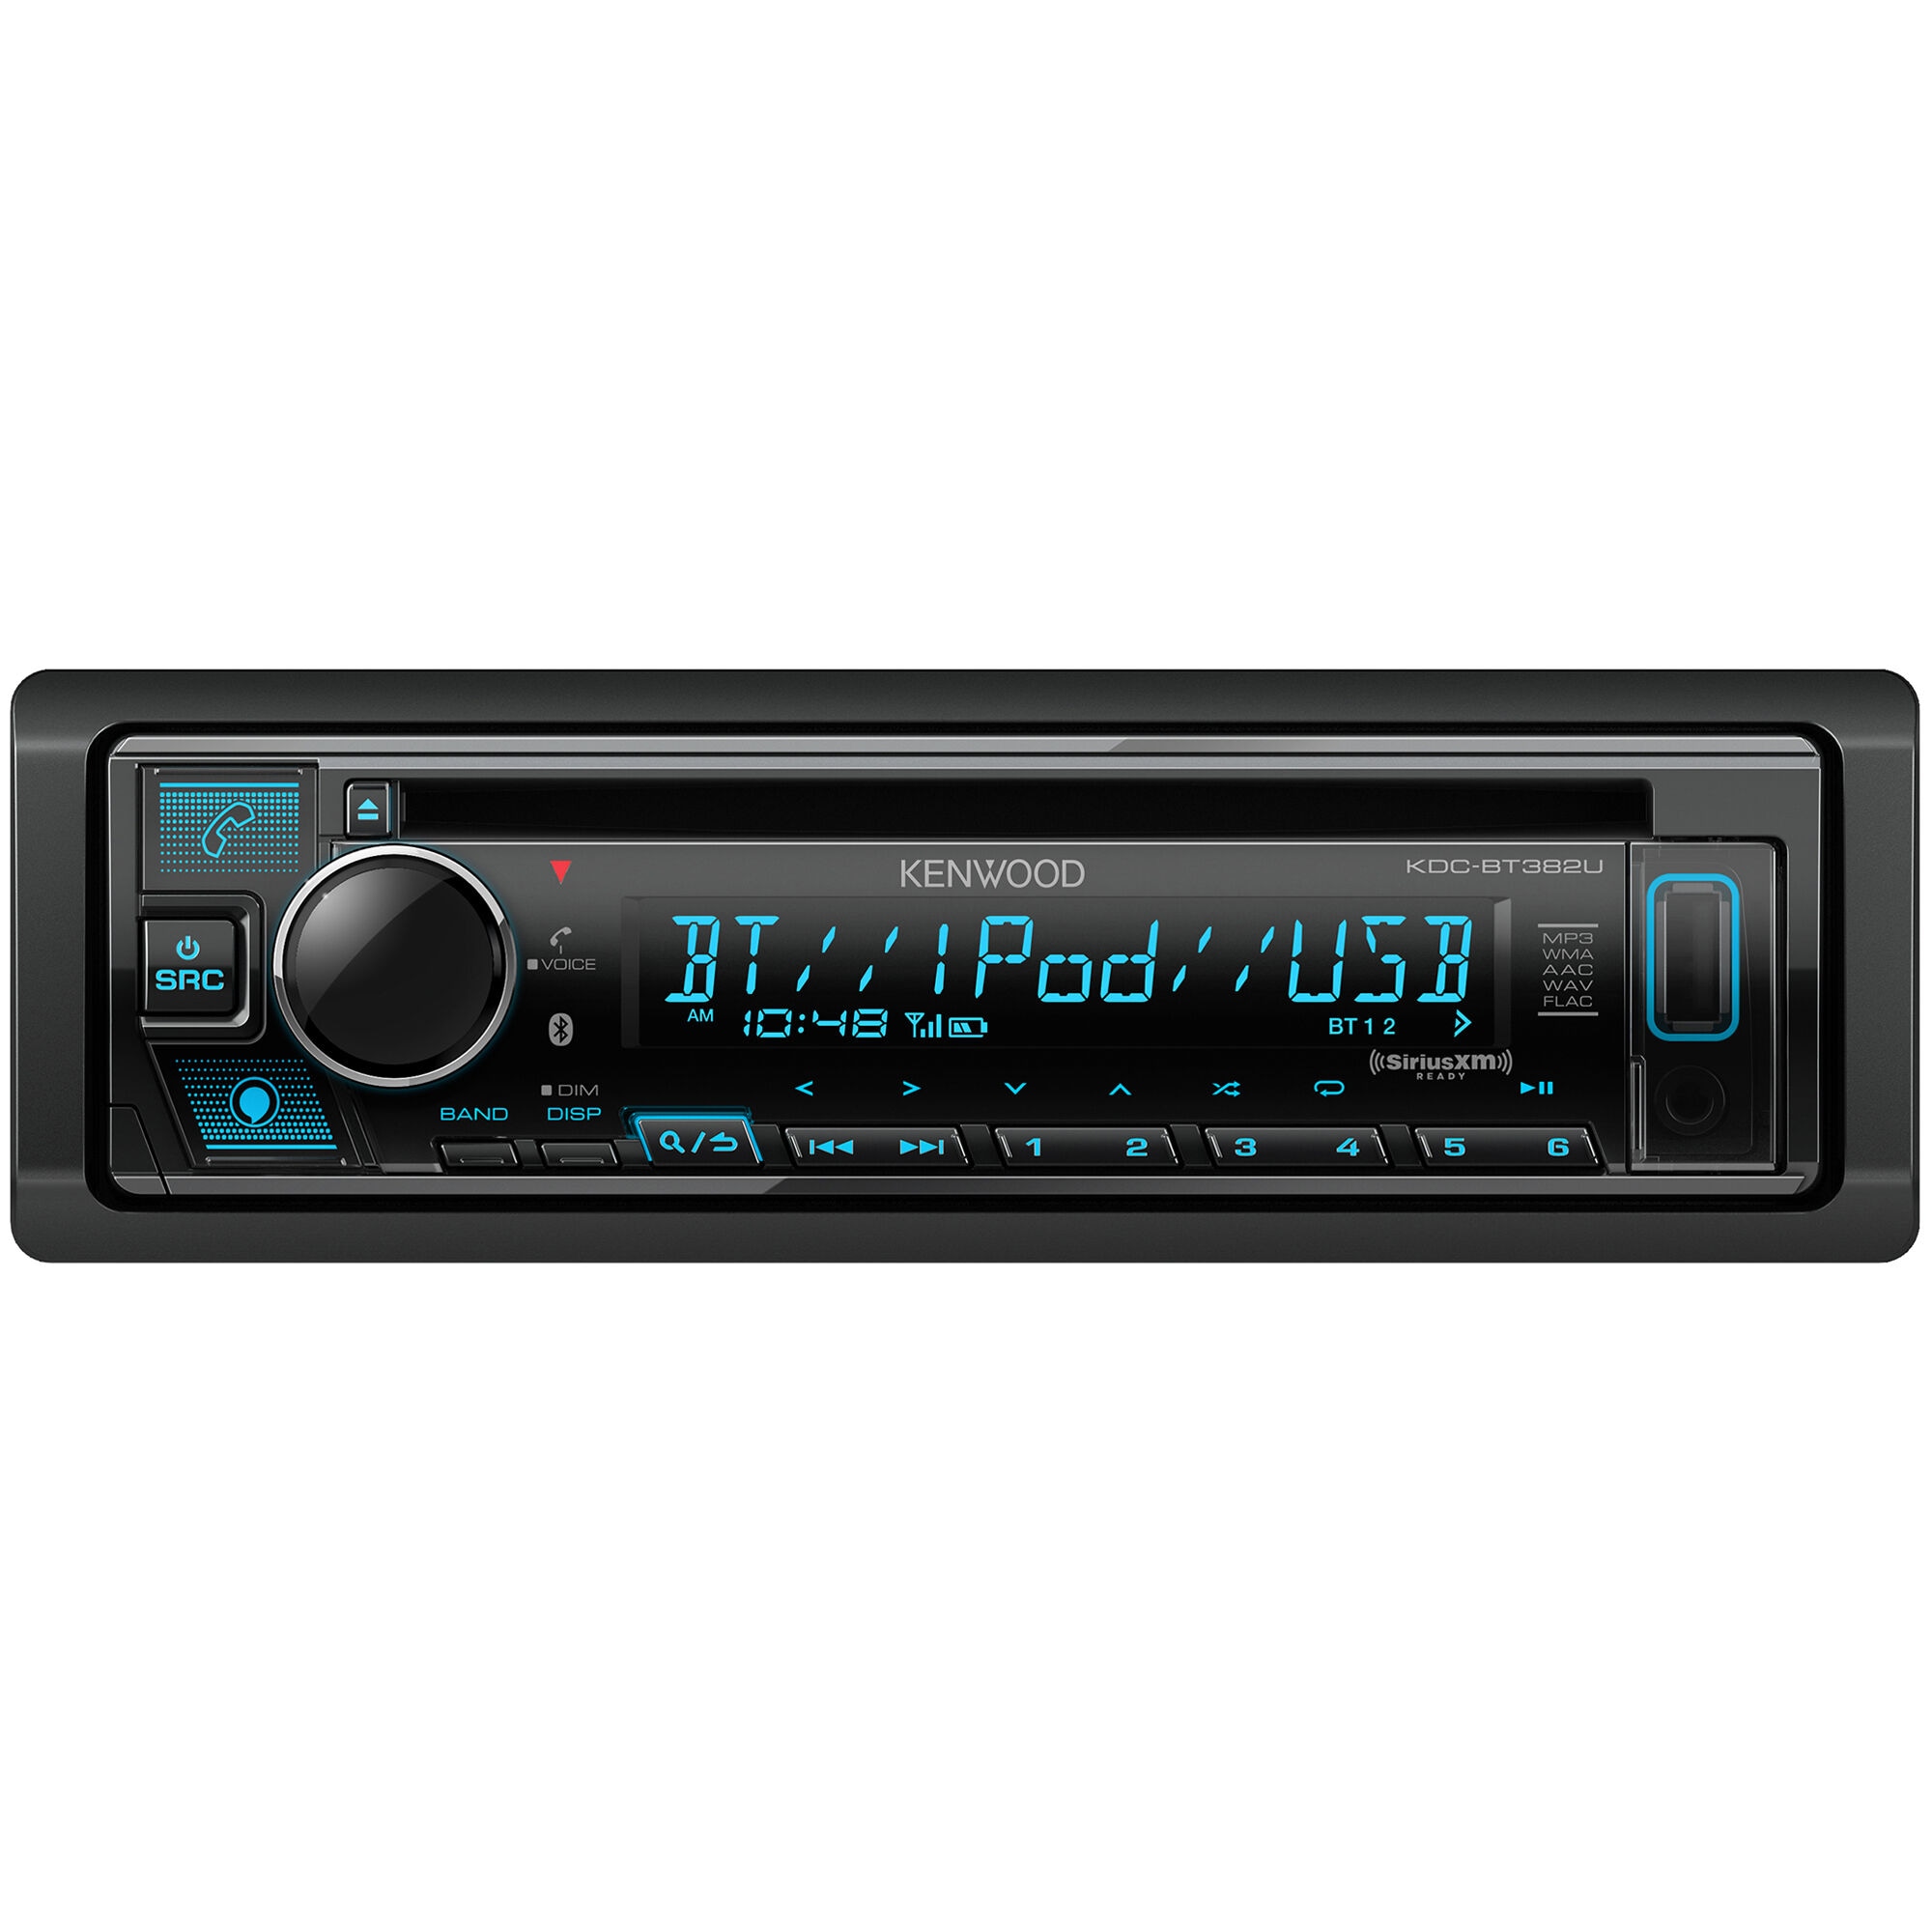 Kenwood In-Dash Detachable Face AM/FM/CD/MP3 Car Stereo